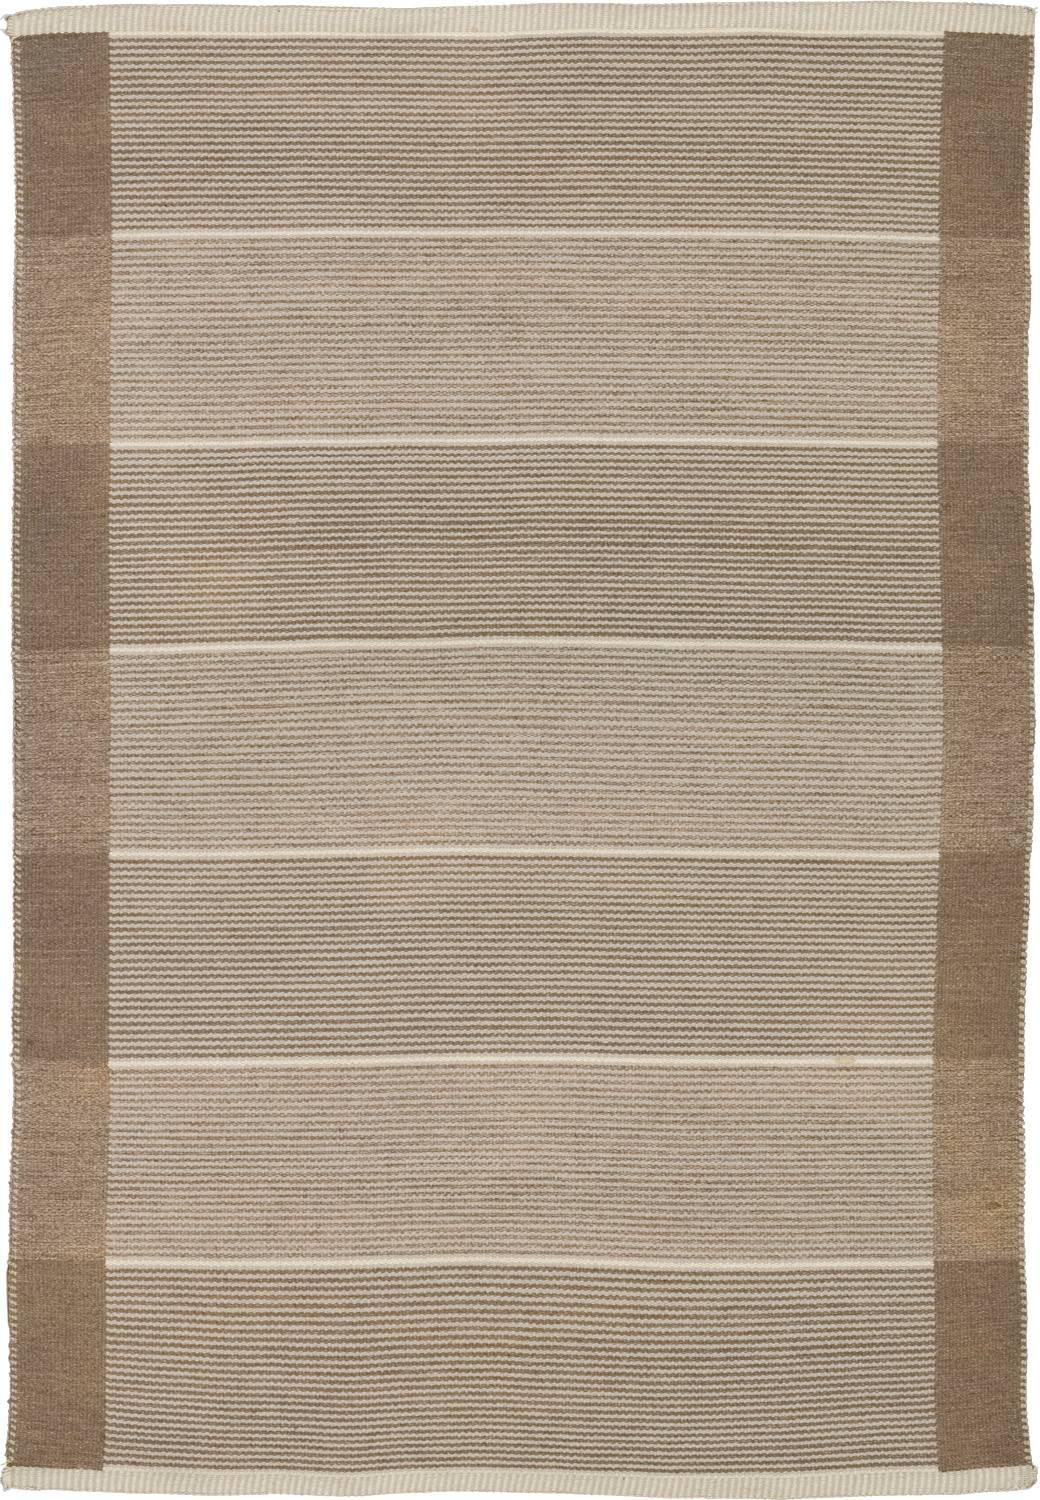 Early 20th Century Swedish Double-Sided Flat-Weave Carpet In Excellent Condition For Sale In New York, NY